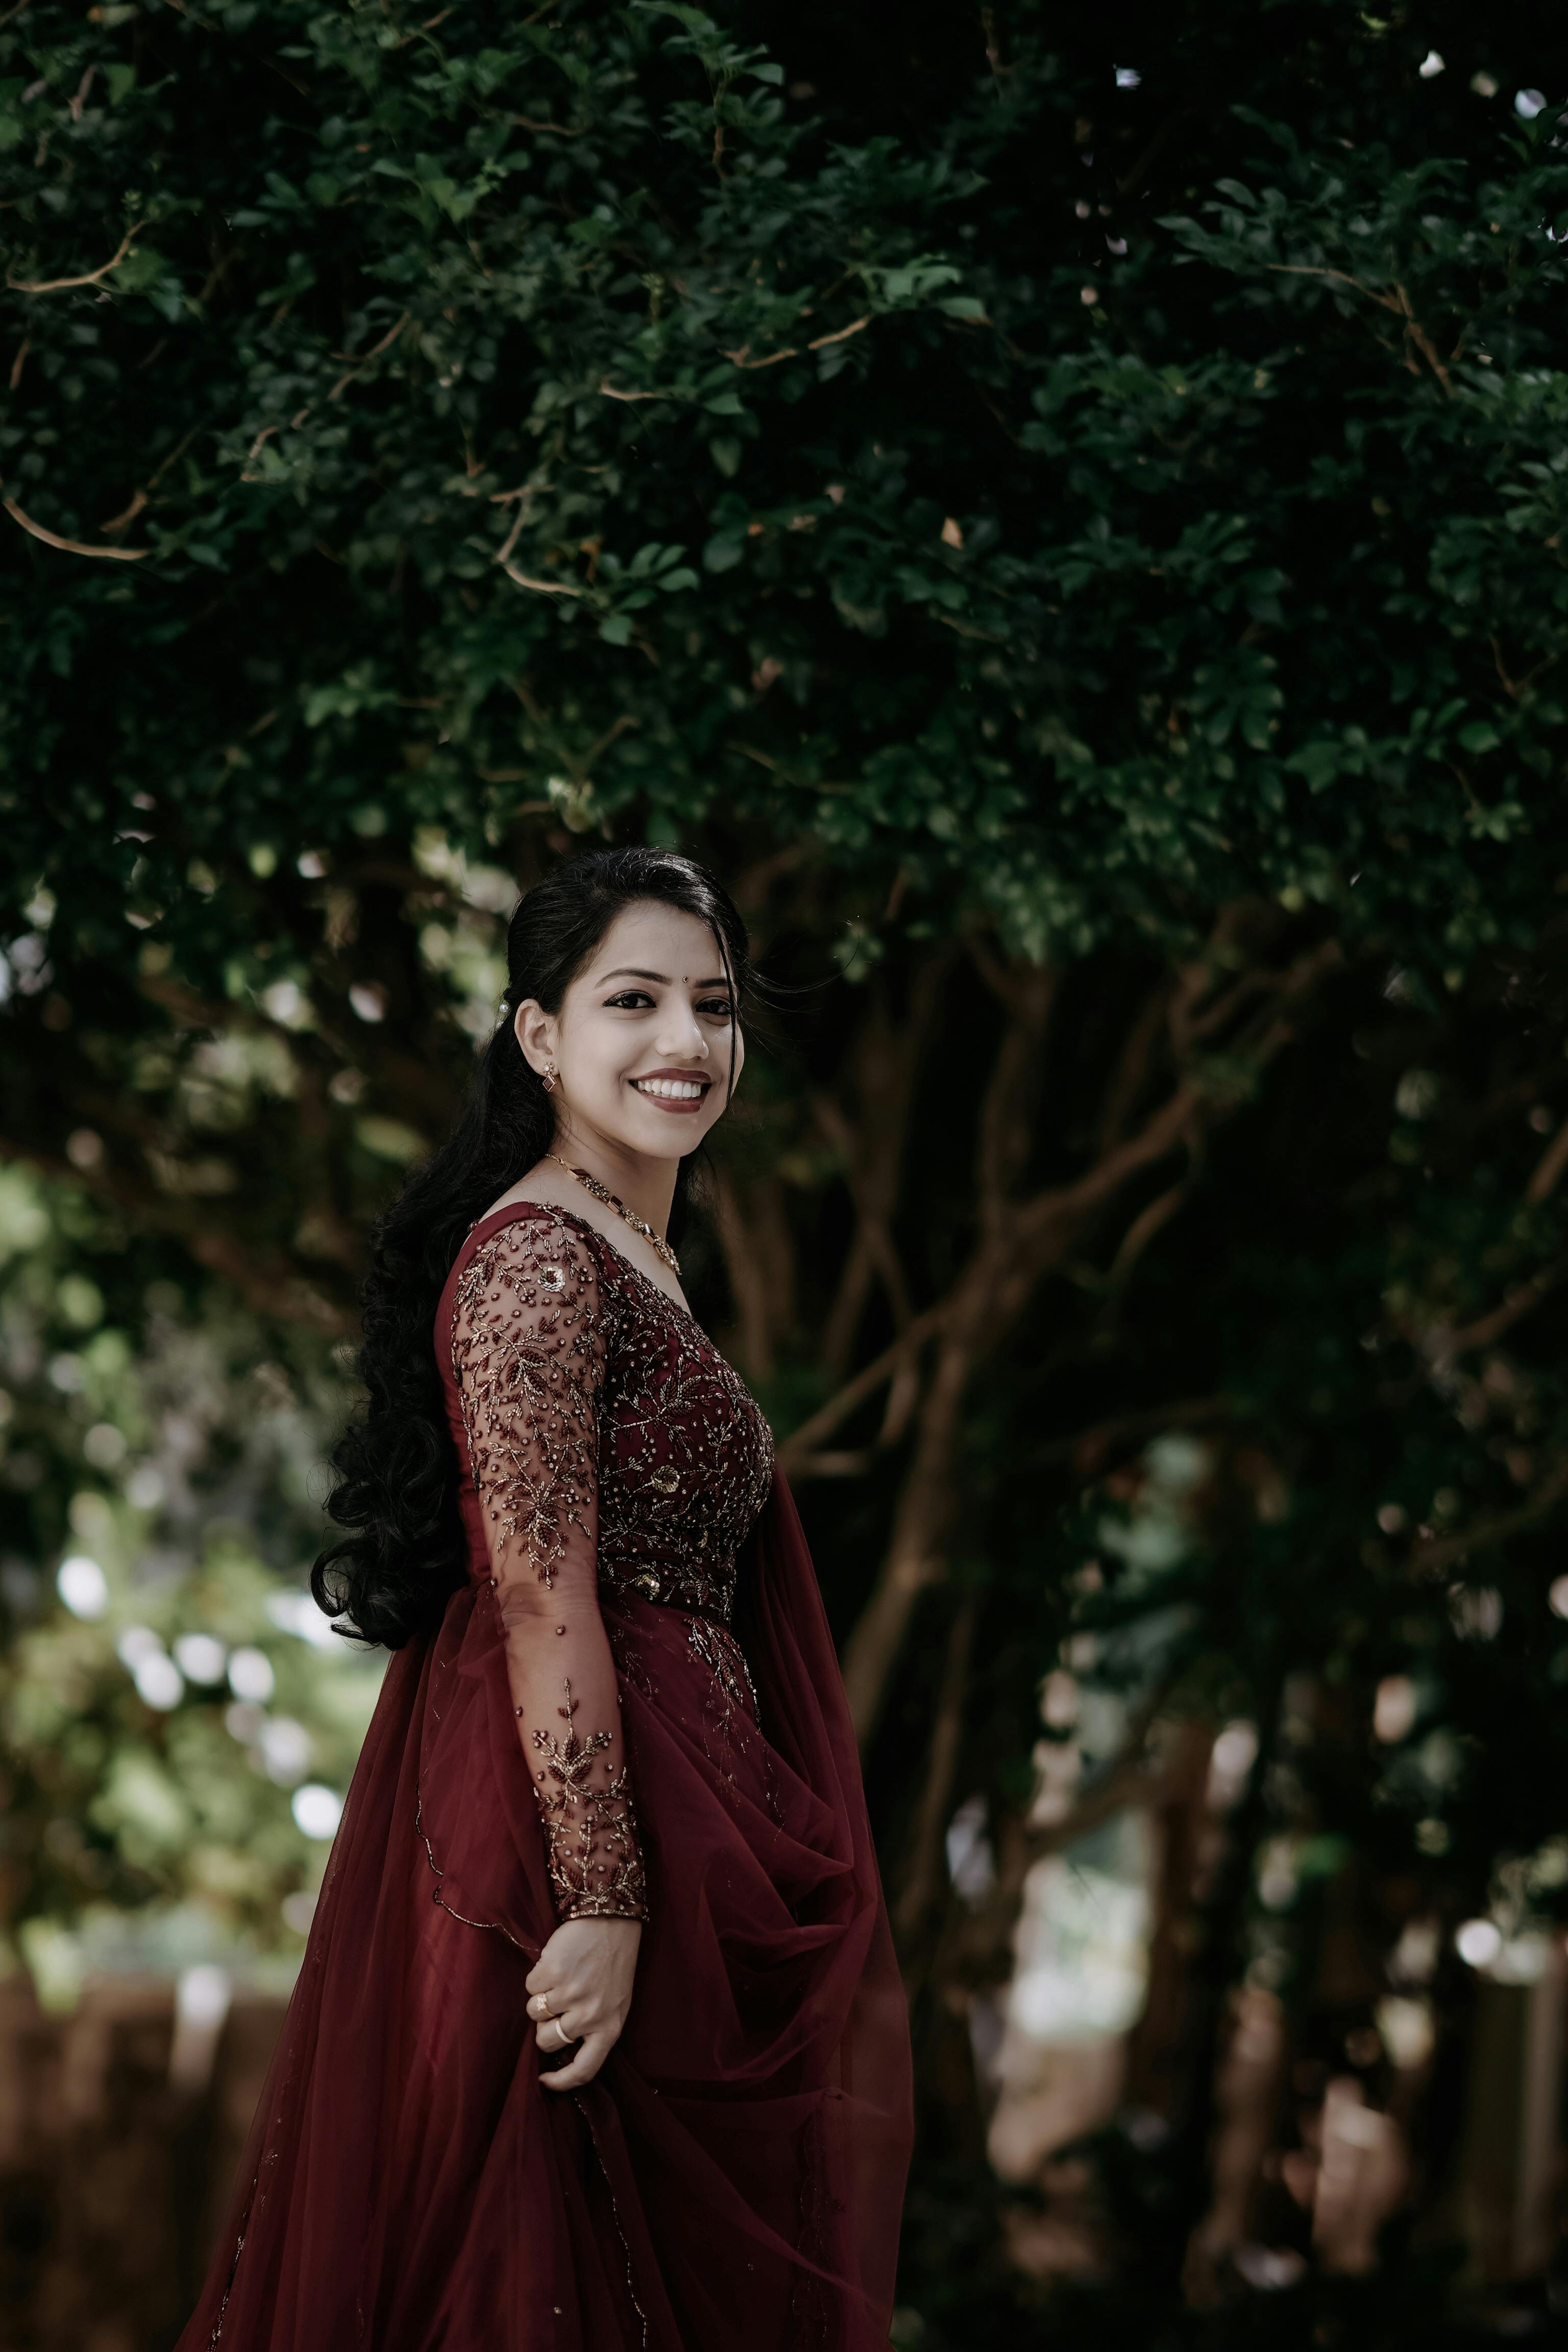 free photo of woman in traditional dress posing under tree